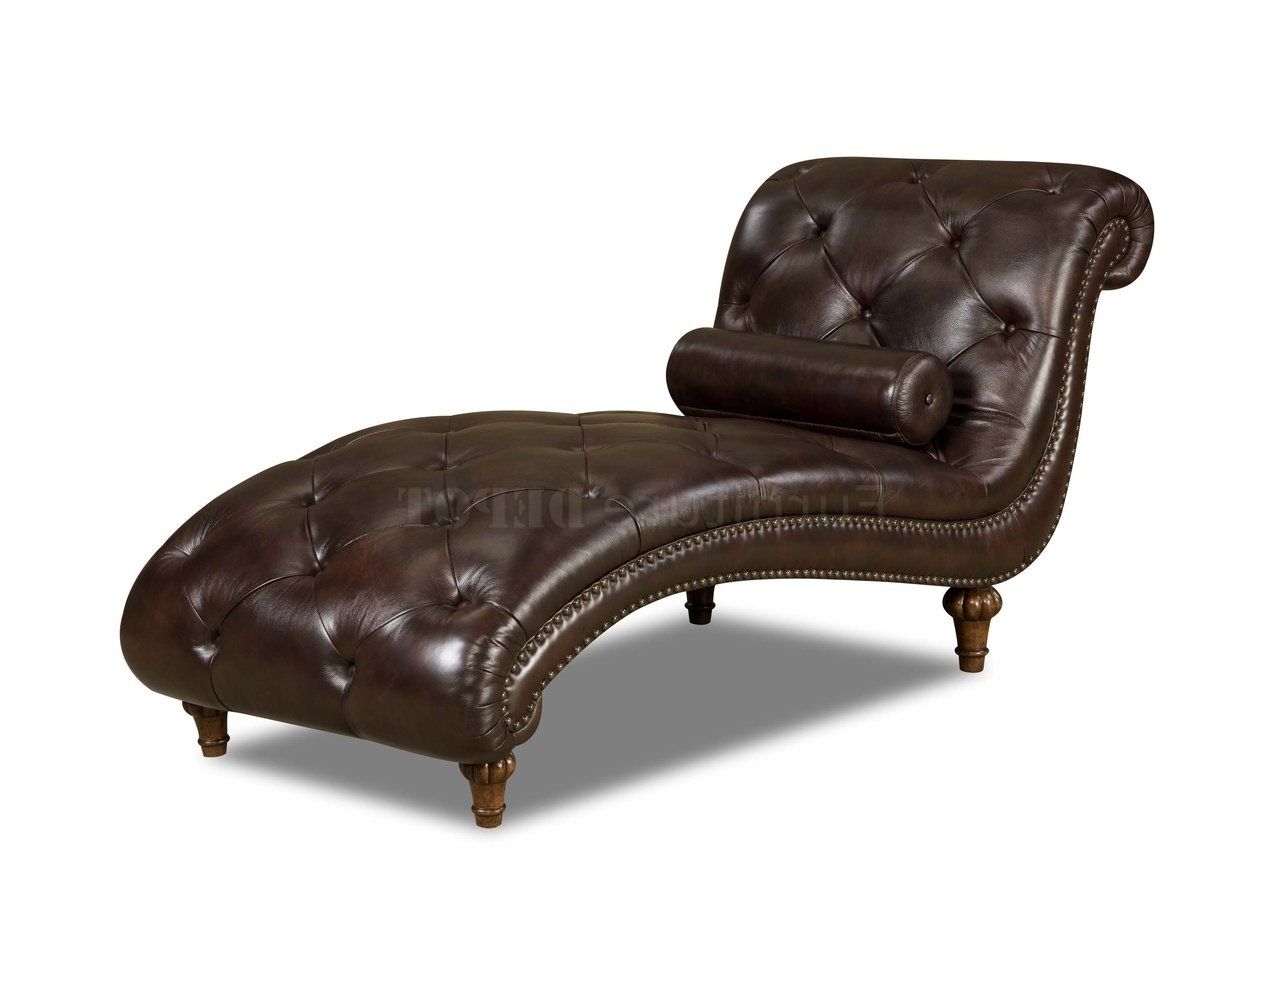 Brown Leather Chaise Lounge Chair • Lounge Chairs Ideas Pertaining To Most Recently Released Brown Leather Chaises (View 10 of 15)